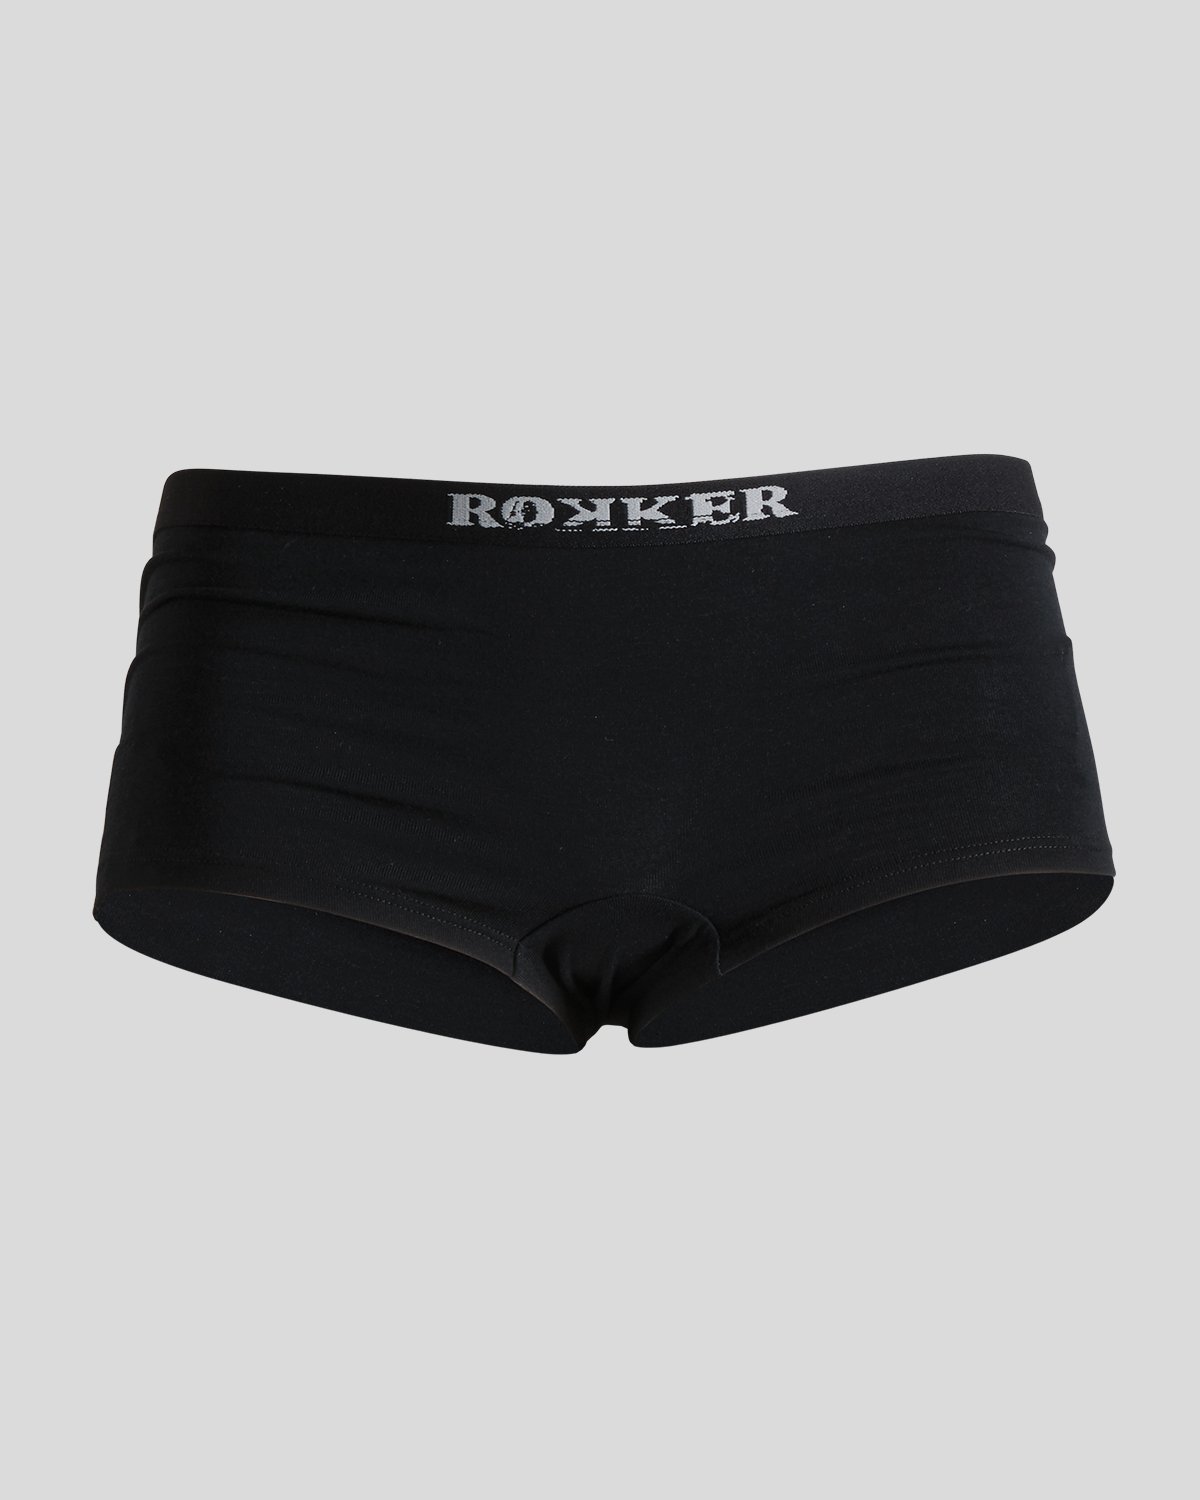 Performance Hipster Underwear The Rokker Company 